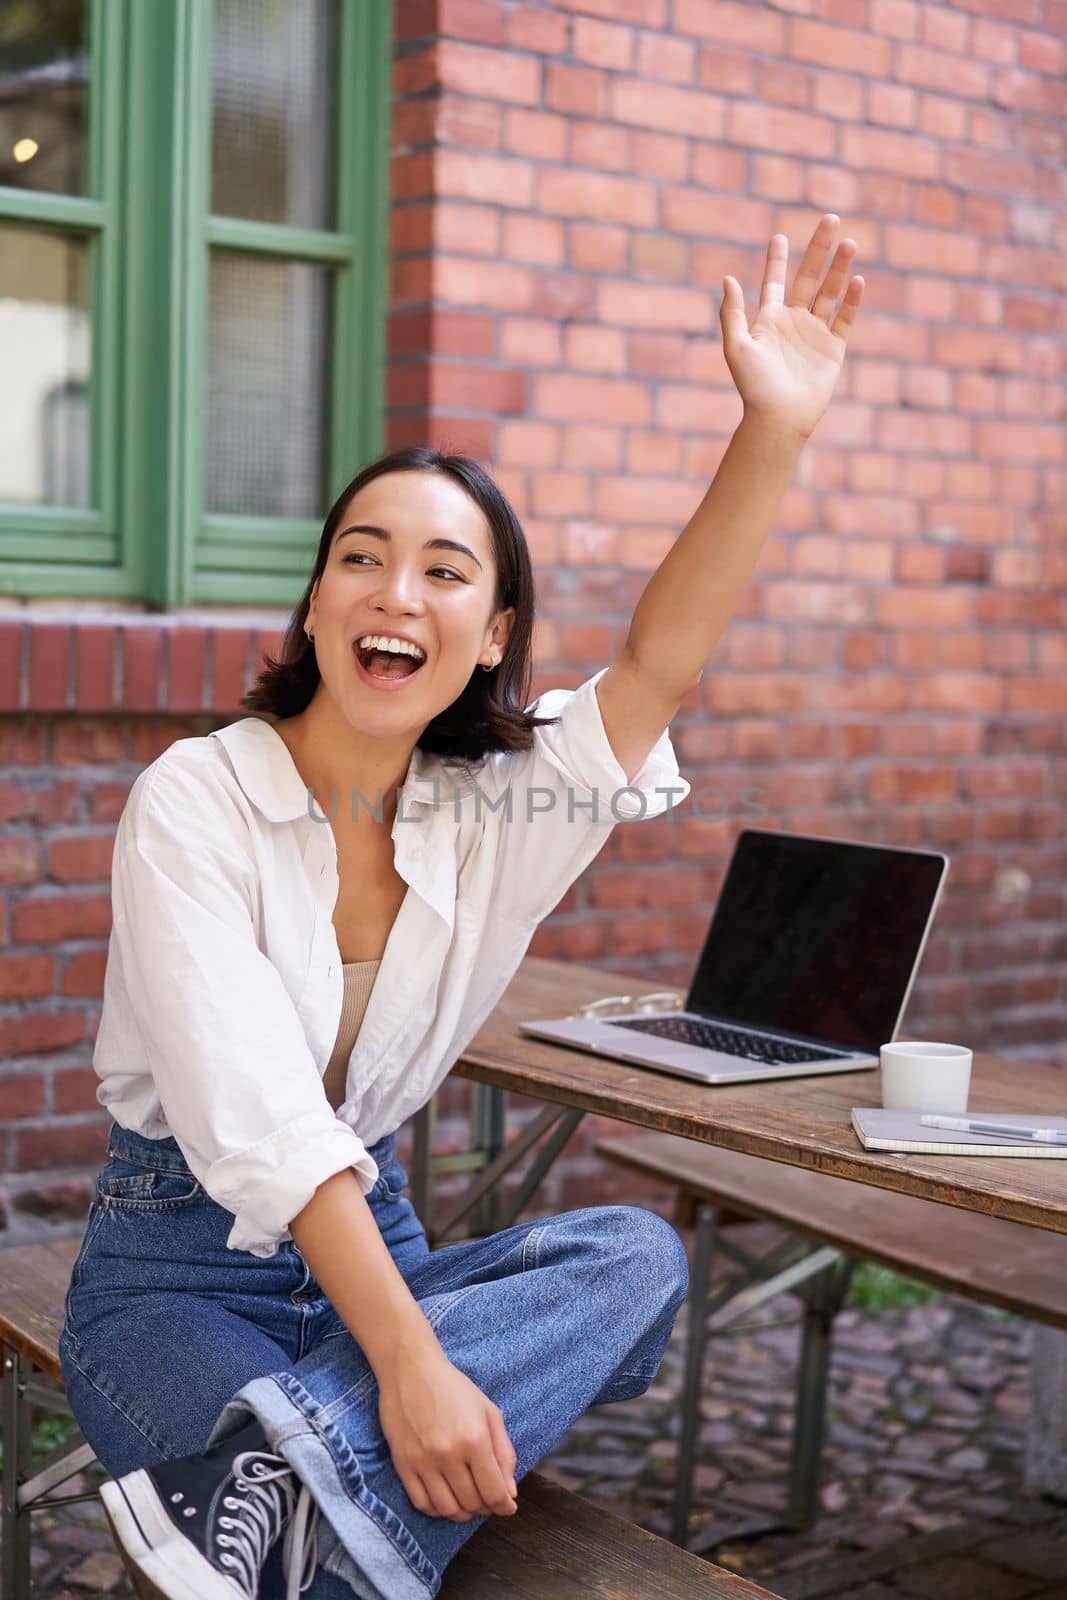 Vertical shot of happy girl attracting attention, waving hand at friend in cafe, sitting on bench with laptop.